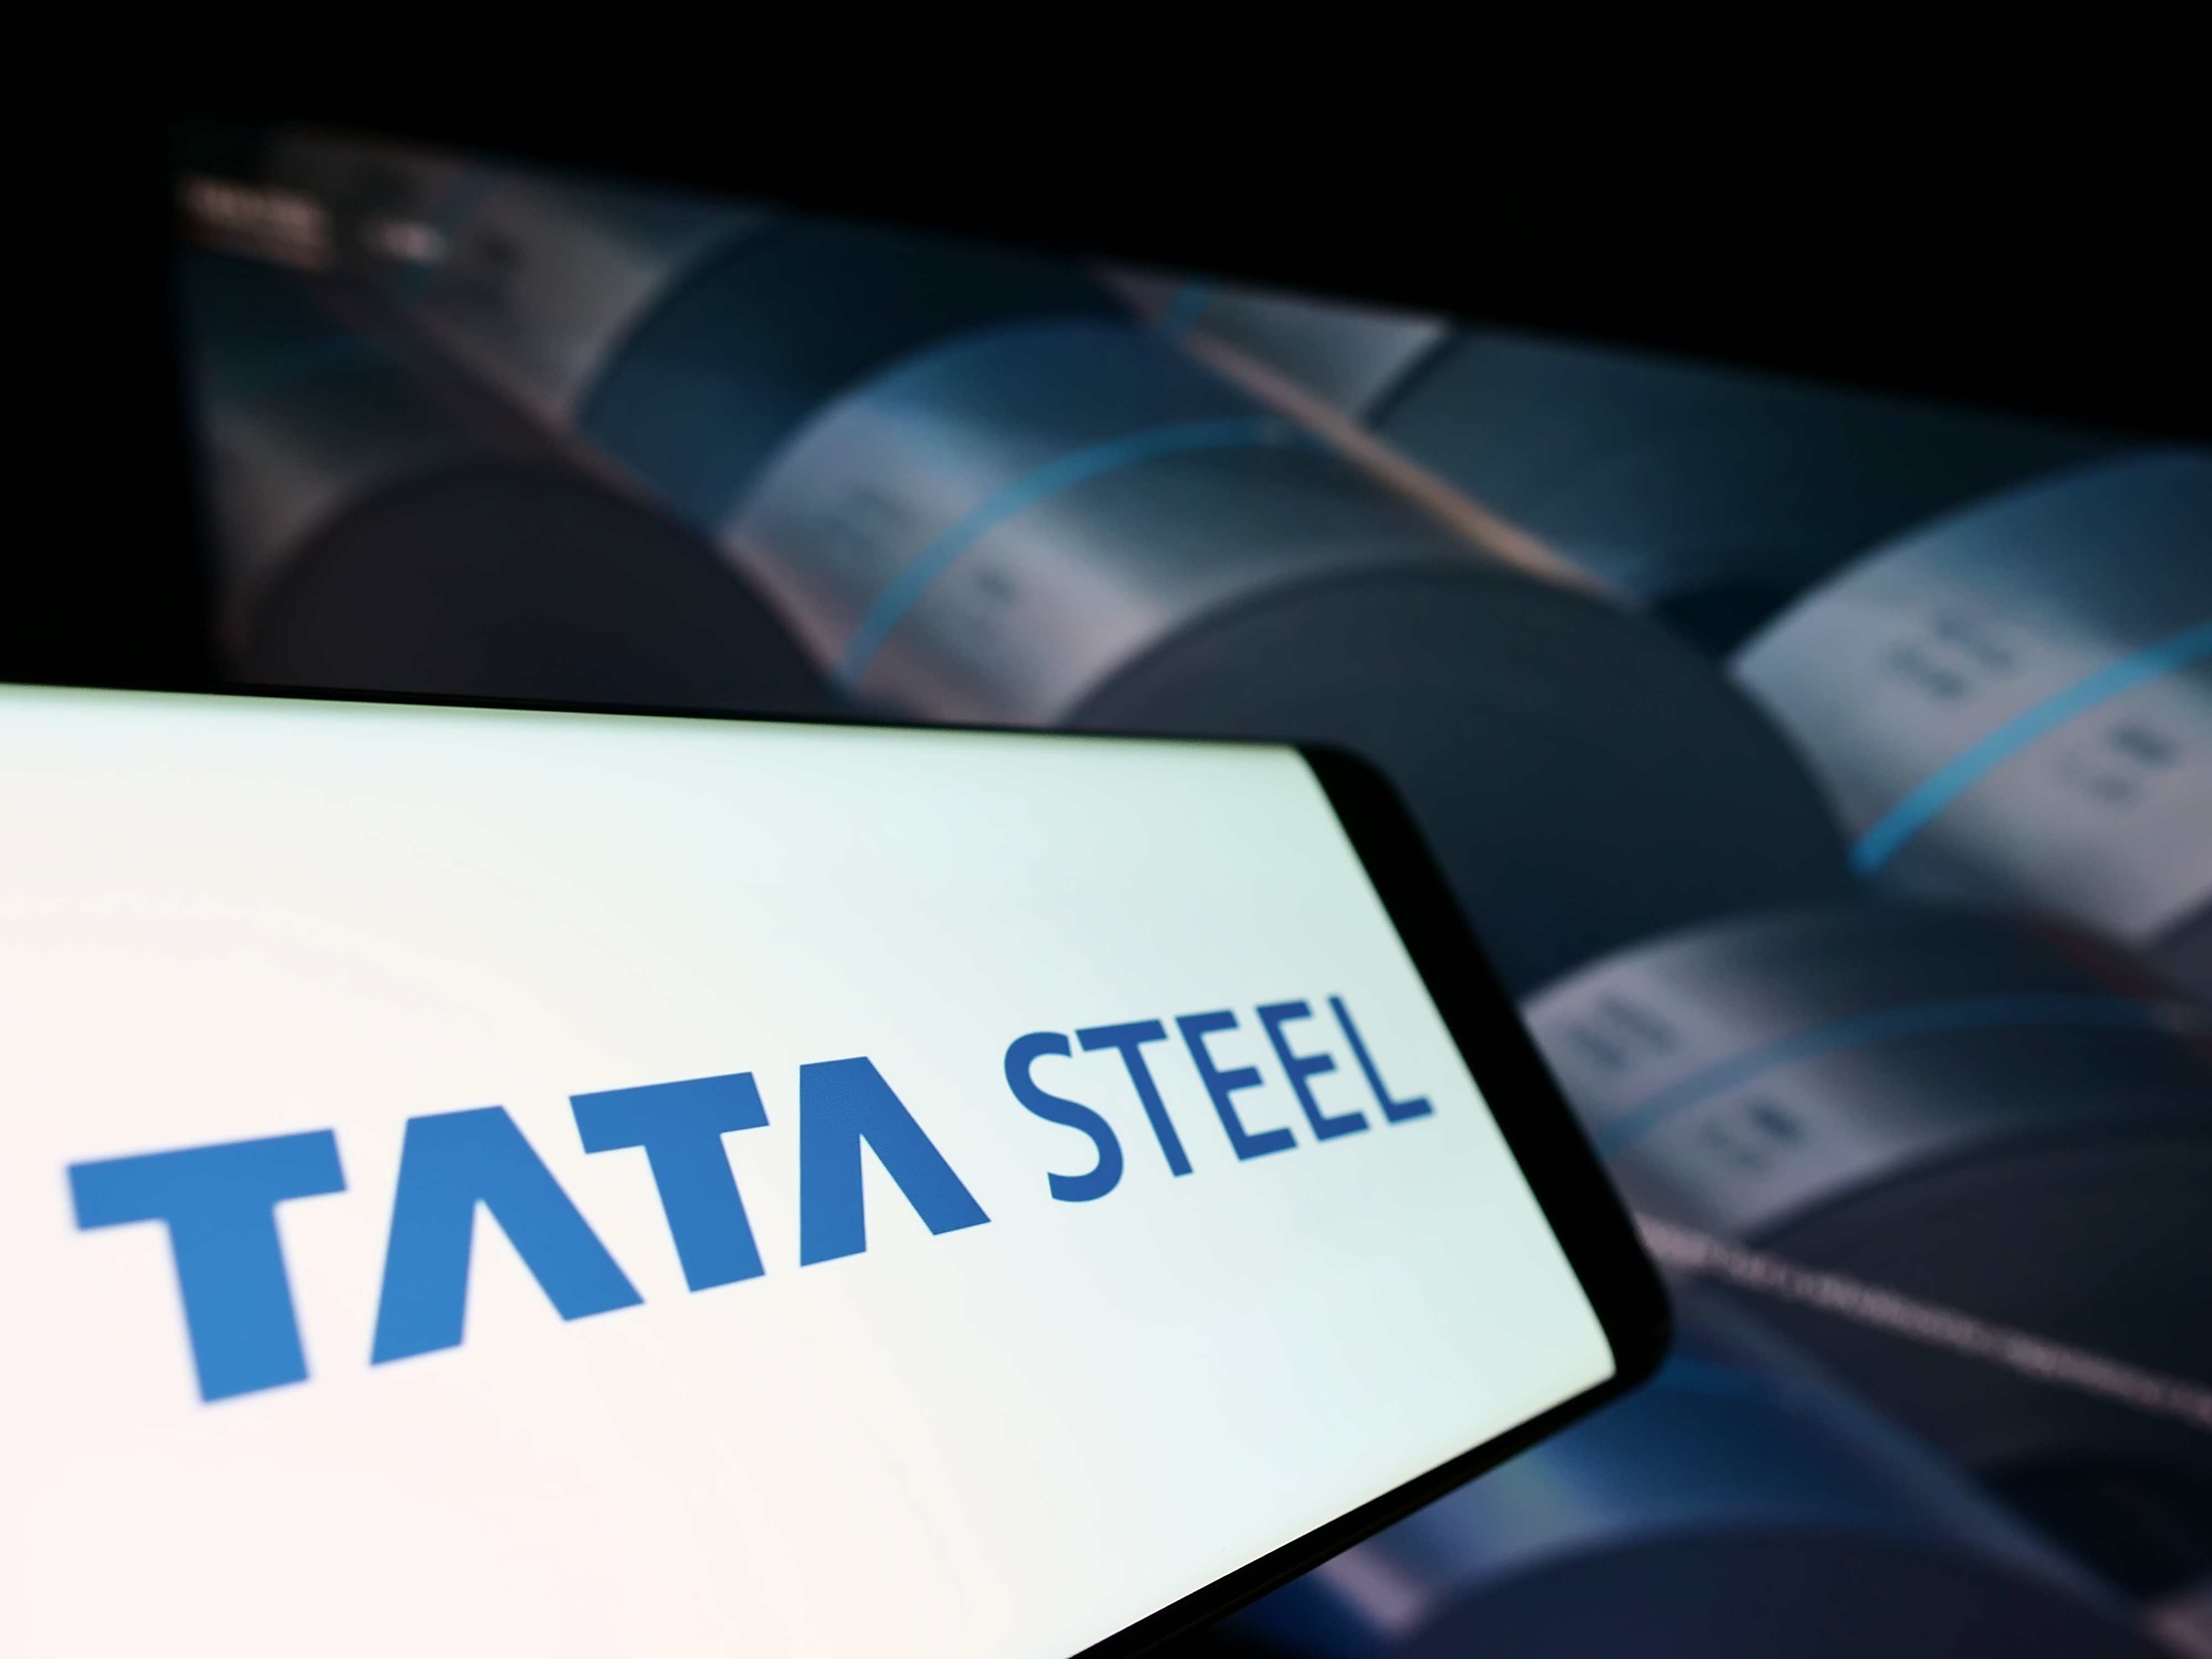 PTSG steels itself for new contract at Tata